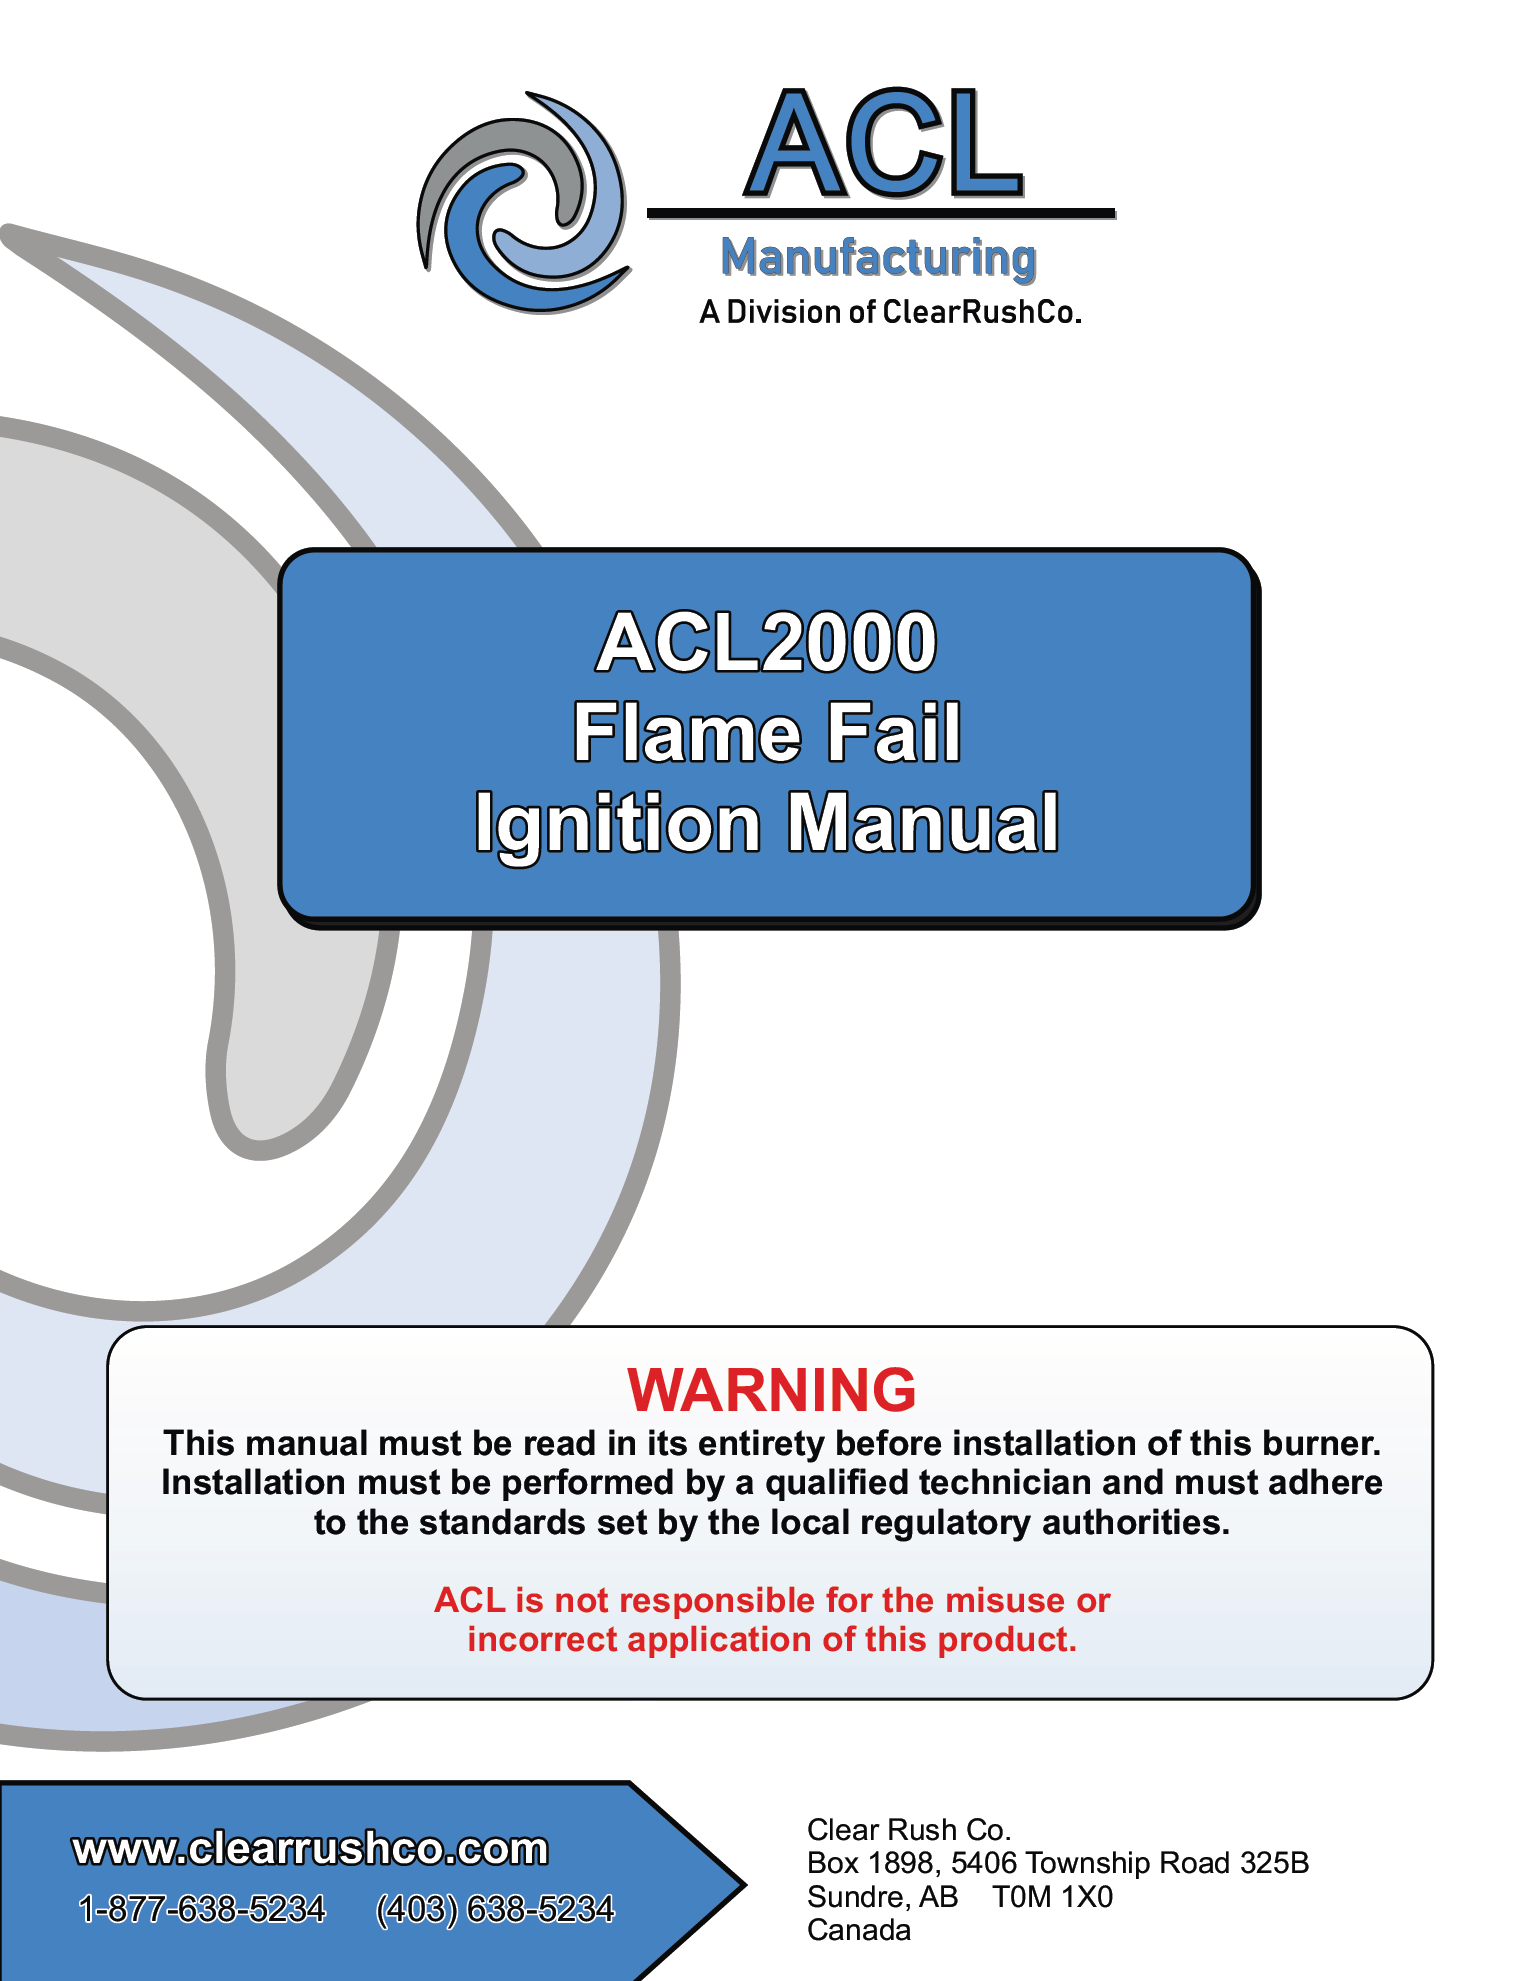 ACL 2000 Flame Fail Ignition